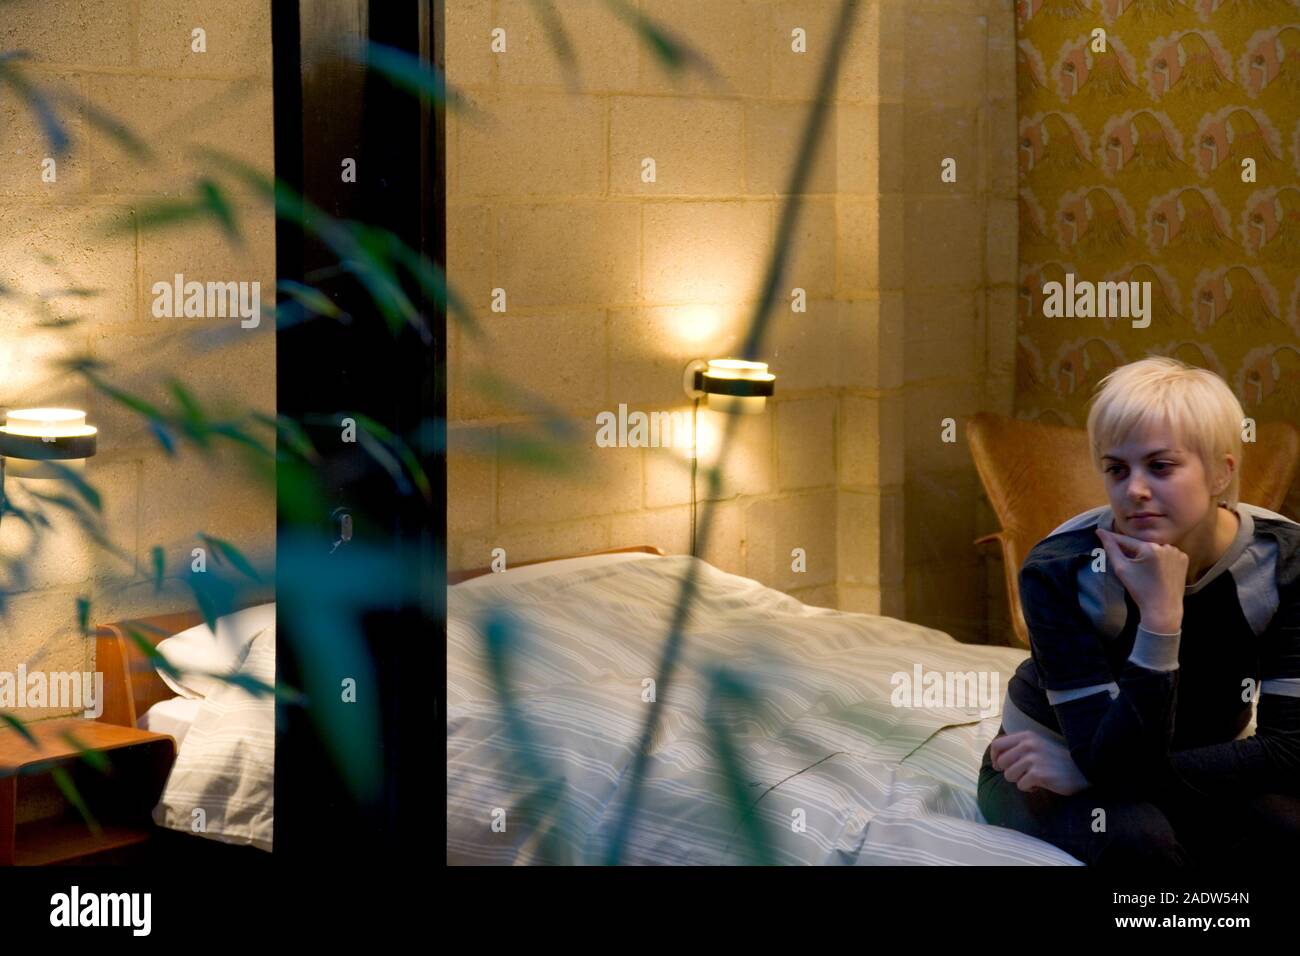 A young woman, 20's, sitting alone on a bed seen through a window and foliage Stock Photo